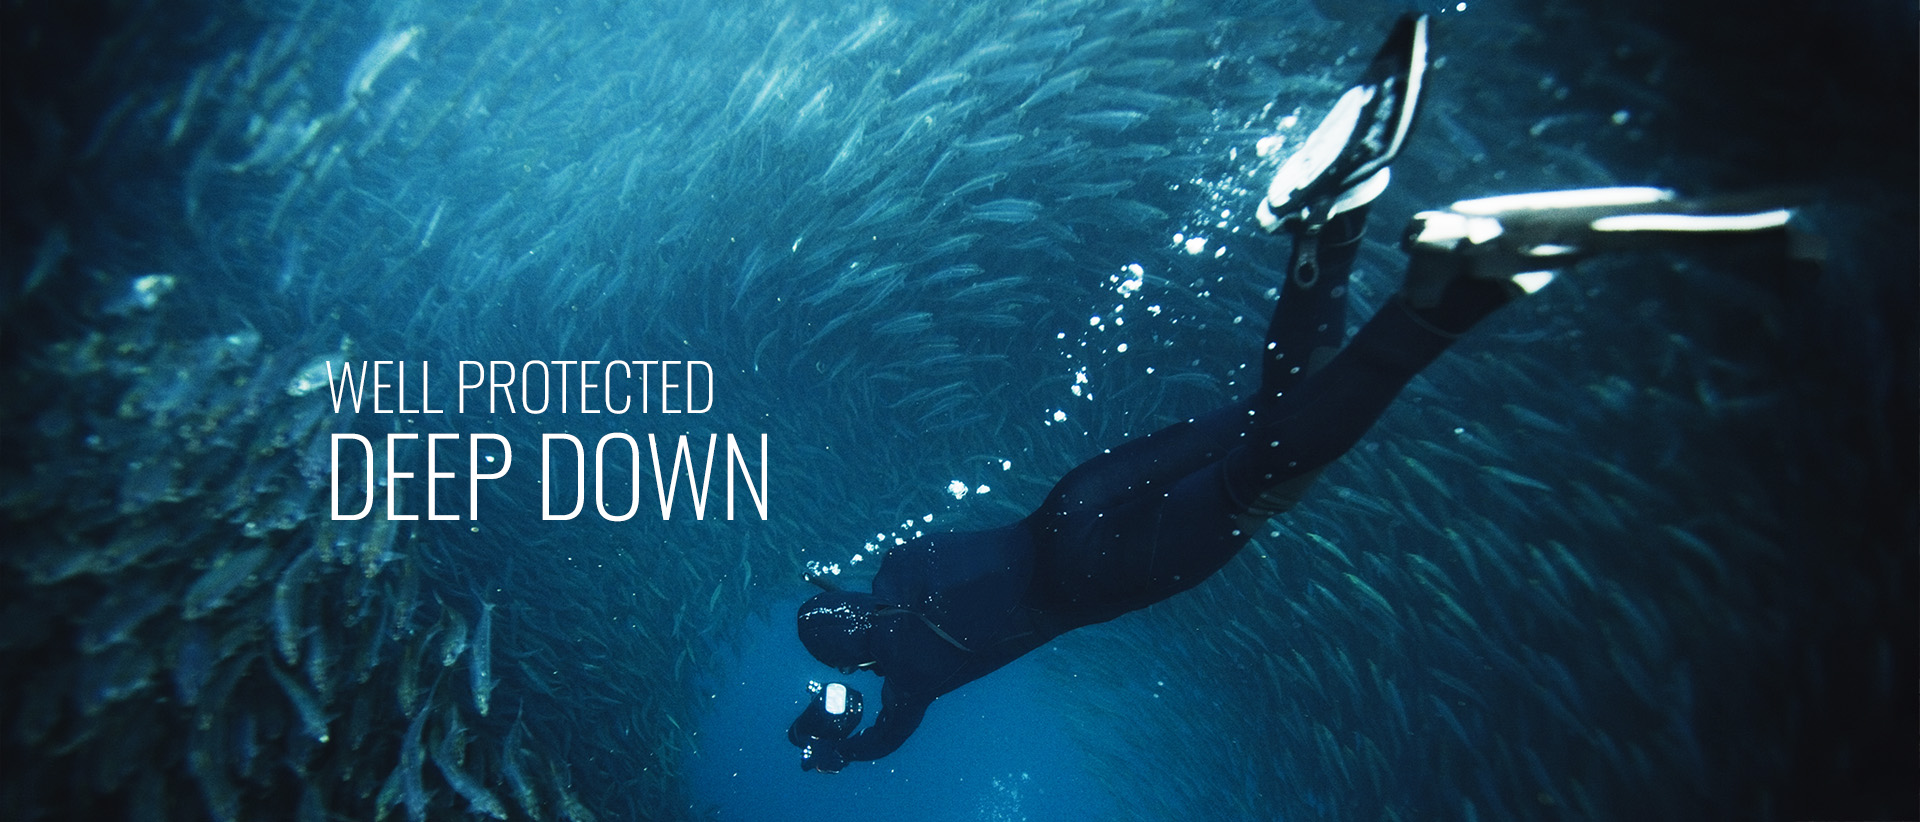 WELL PROTECTED-DEEP DOWN